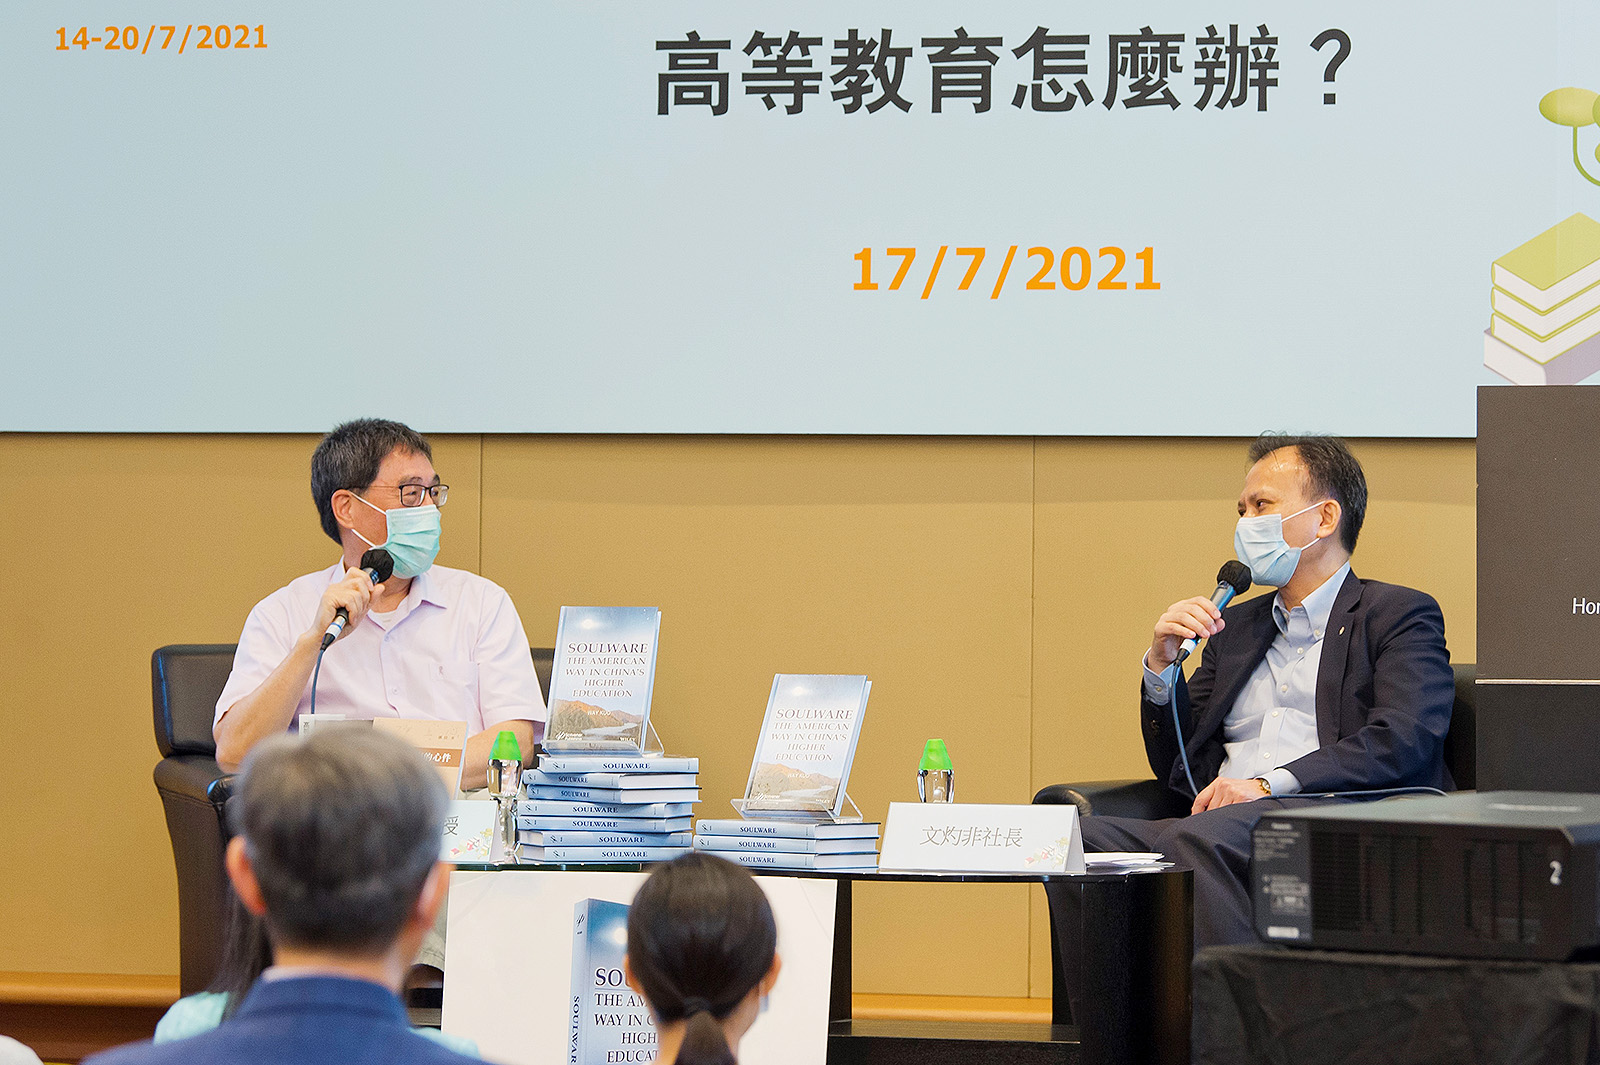 President Kuo discussed the importance of “soulware” with media veteran Mr Man Cheuk-fei.